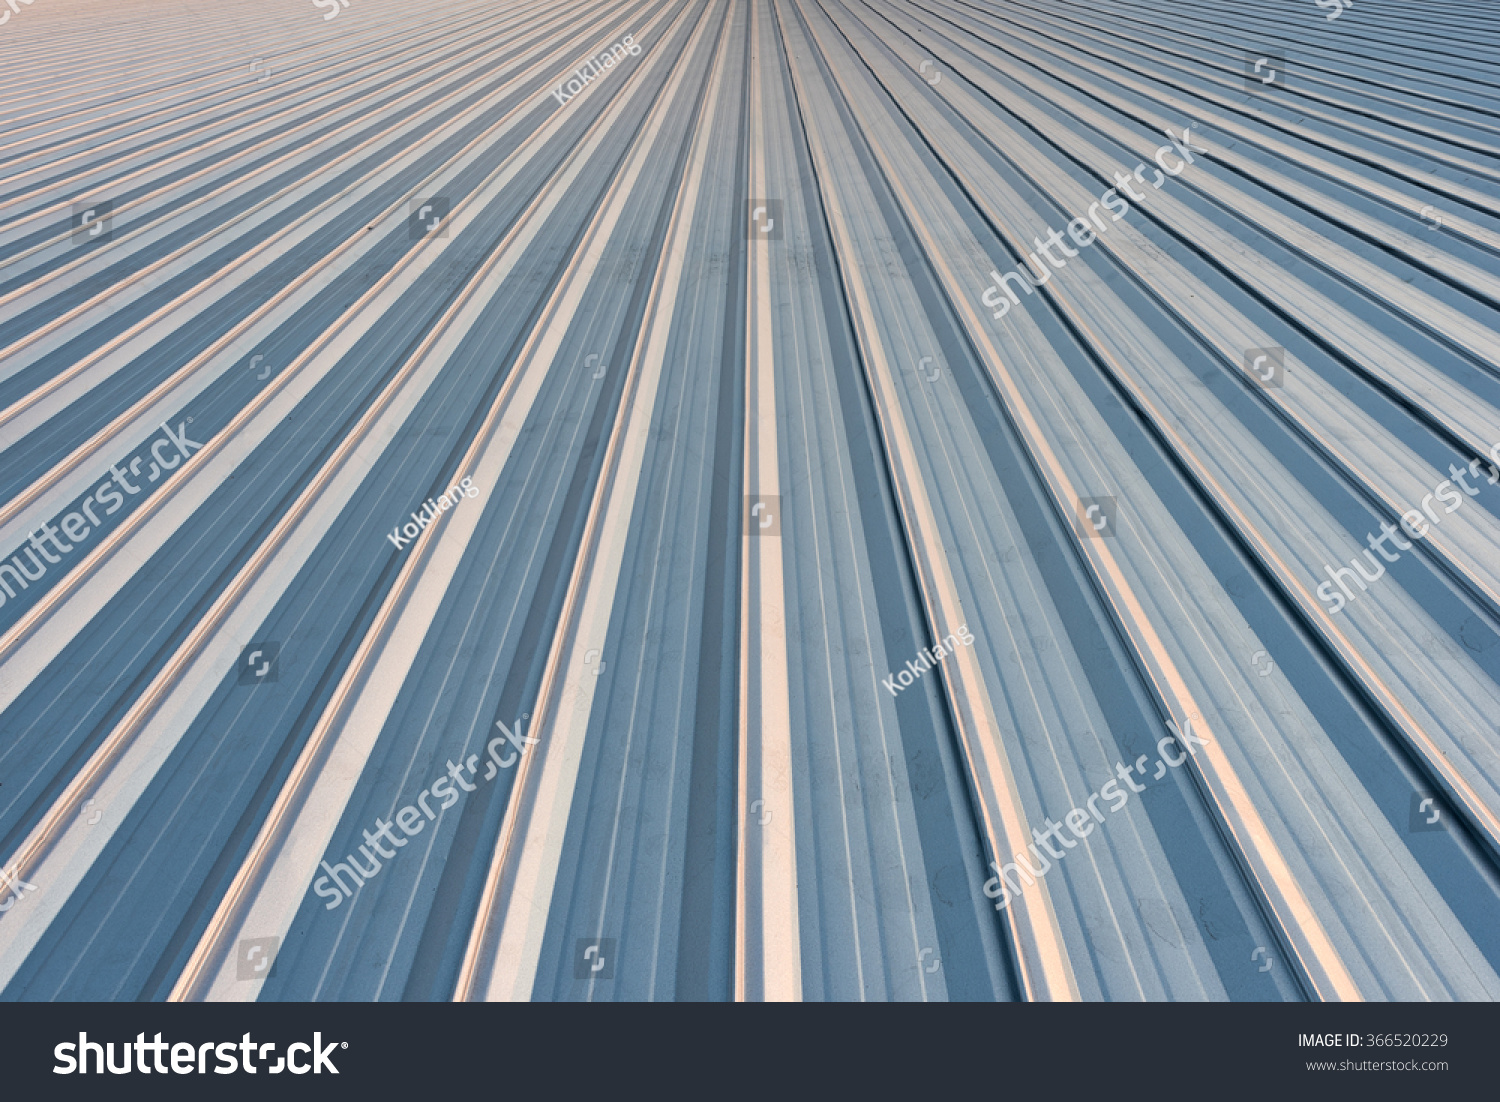 Roof Sheet Metal Corrugated Roof Factory Stock Photo (Edit Now) 366520229